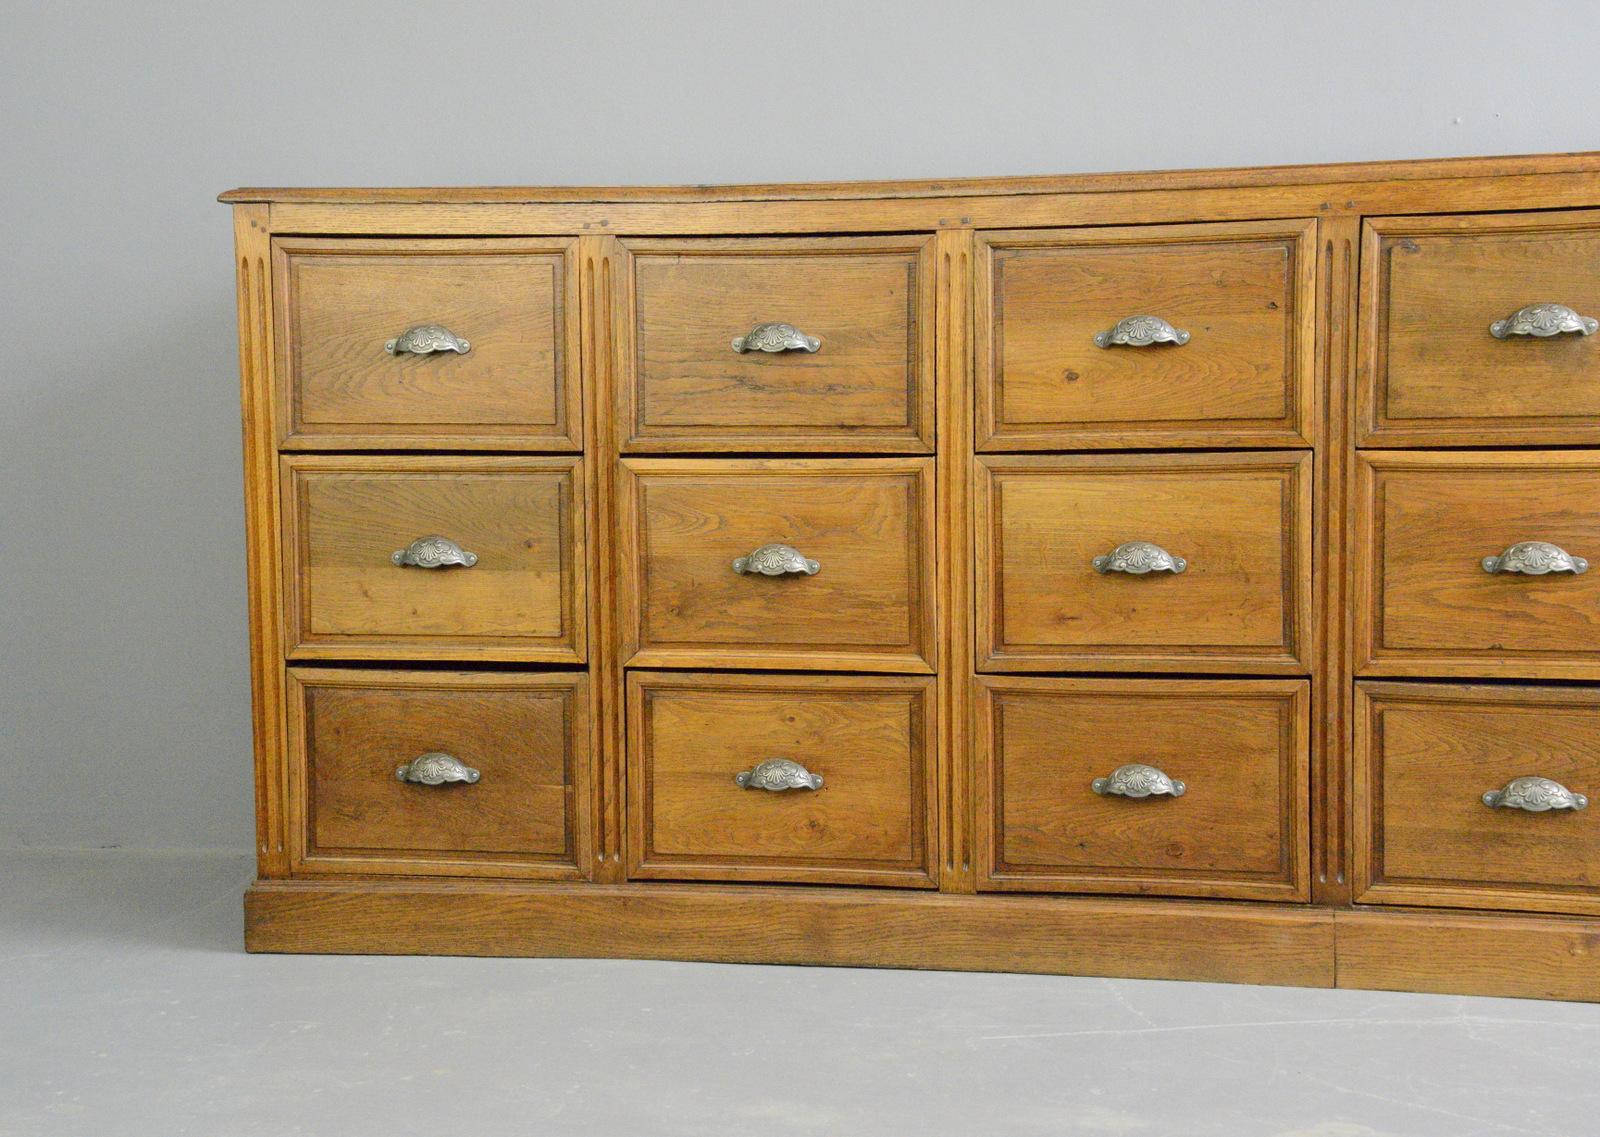 19th century French oak bank of drawers

- Cast iron handles
- Solid oak drawers and frame
- Oak panelled sides
- Solid Oak top
- French, 1890
- Measures: 282cm long x 53cm deep x 102cm tall
- Each drawer measures (internal) 37cm wide x 46cm